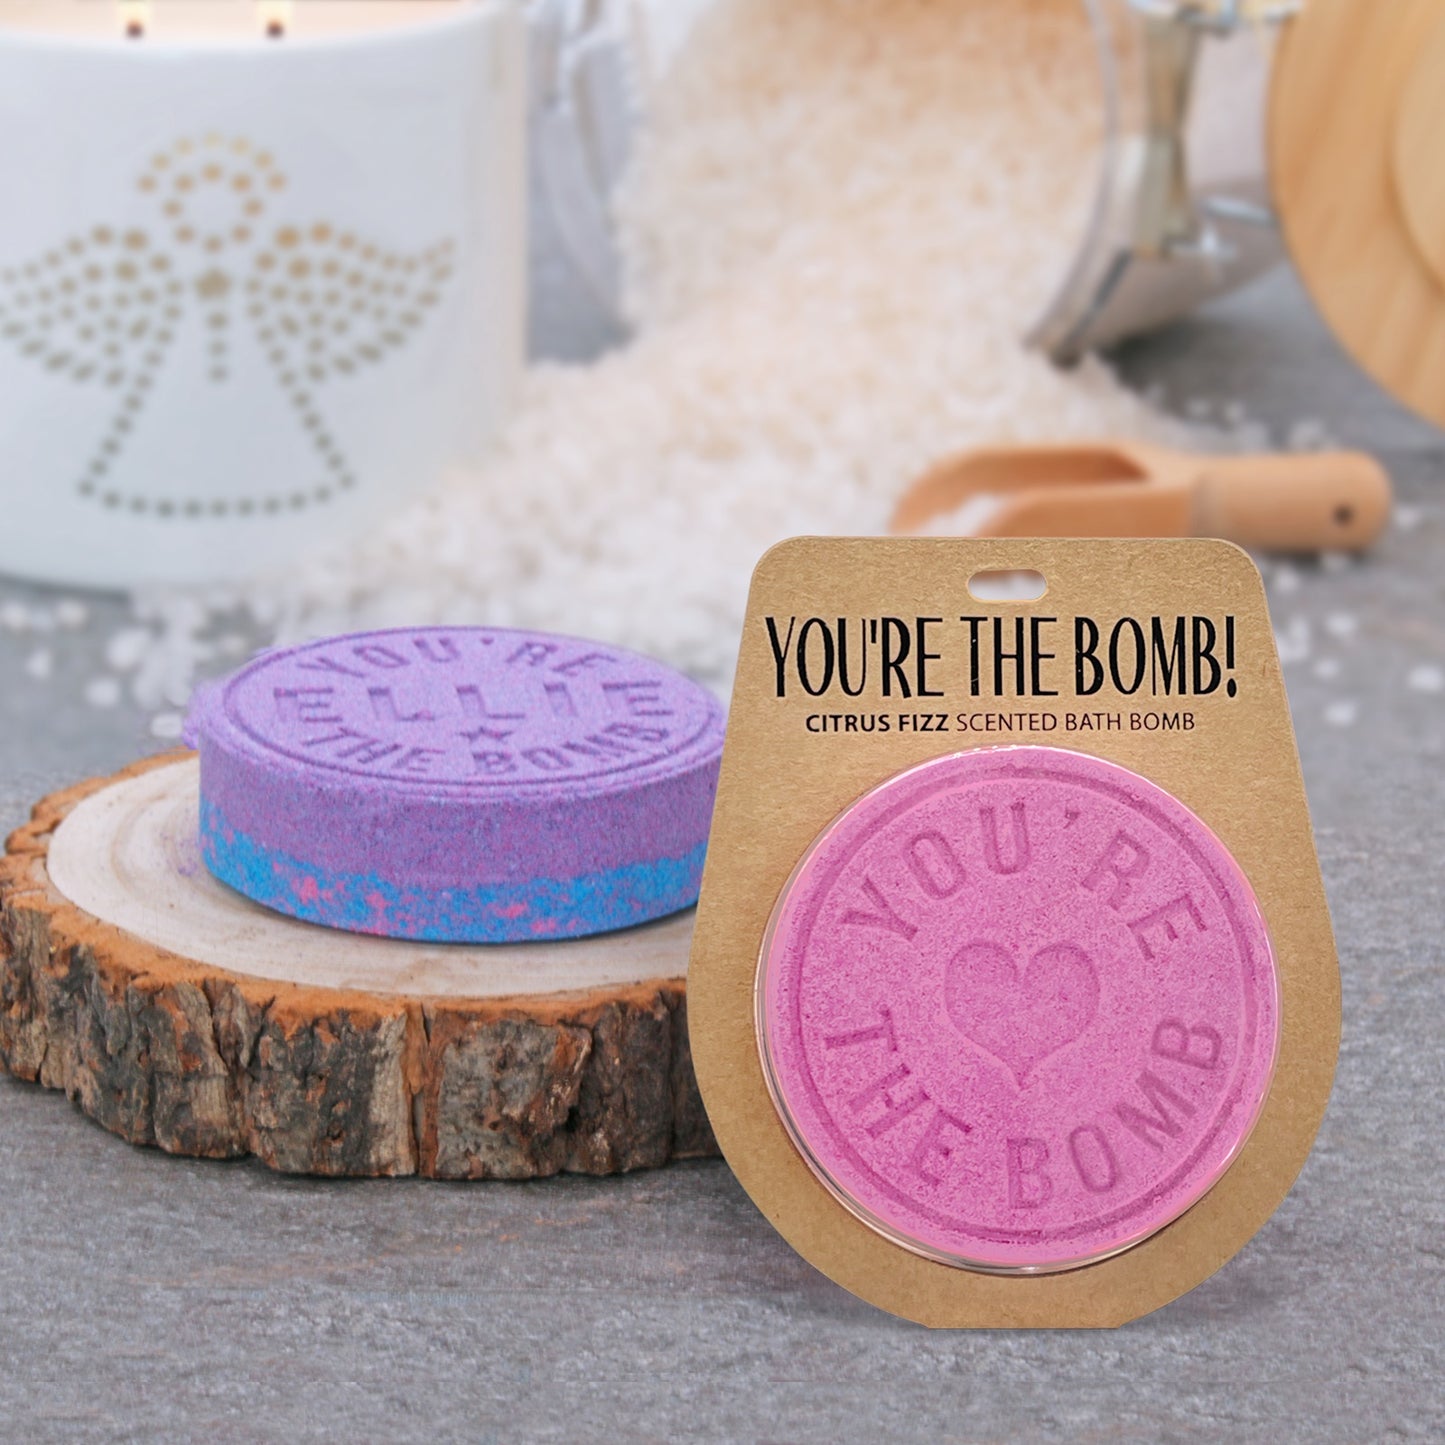 H&H Personalised Scented Bath Bombs - Bethany